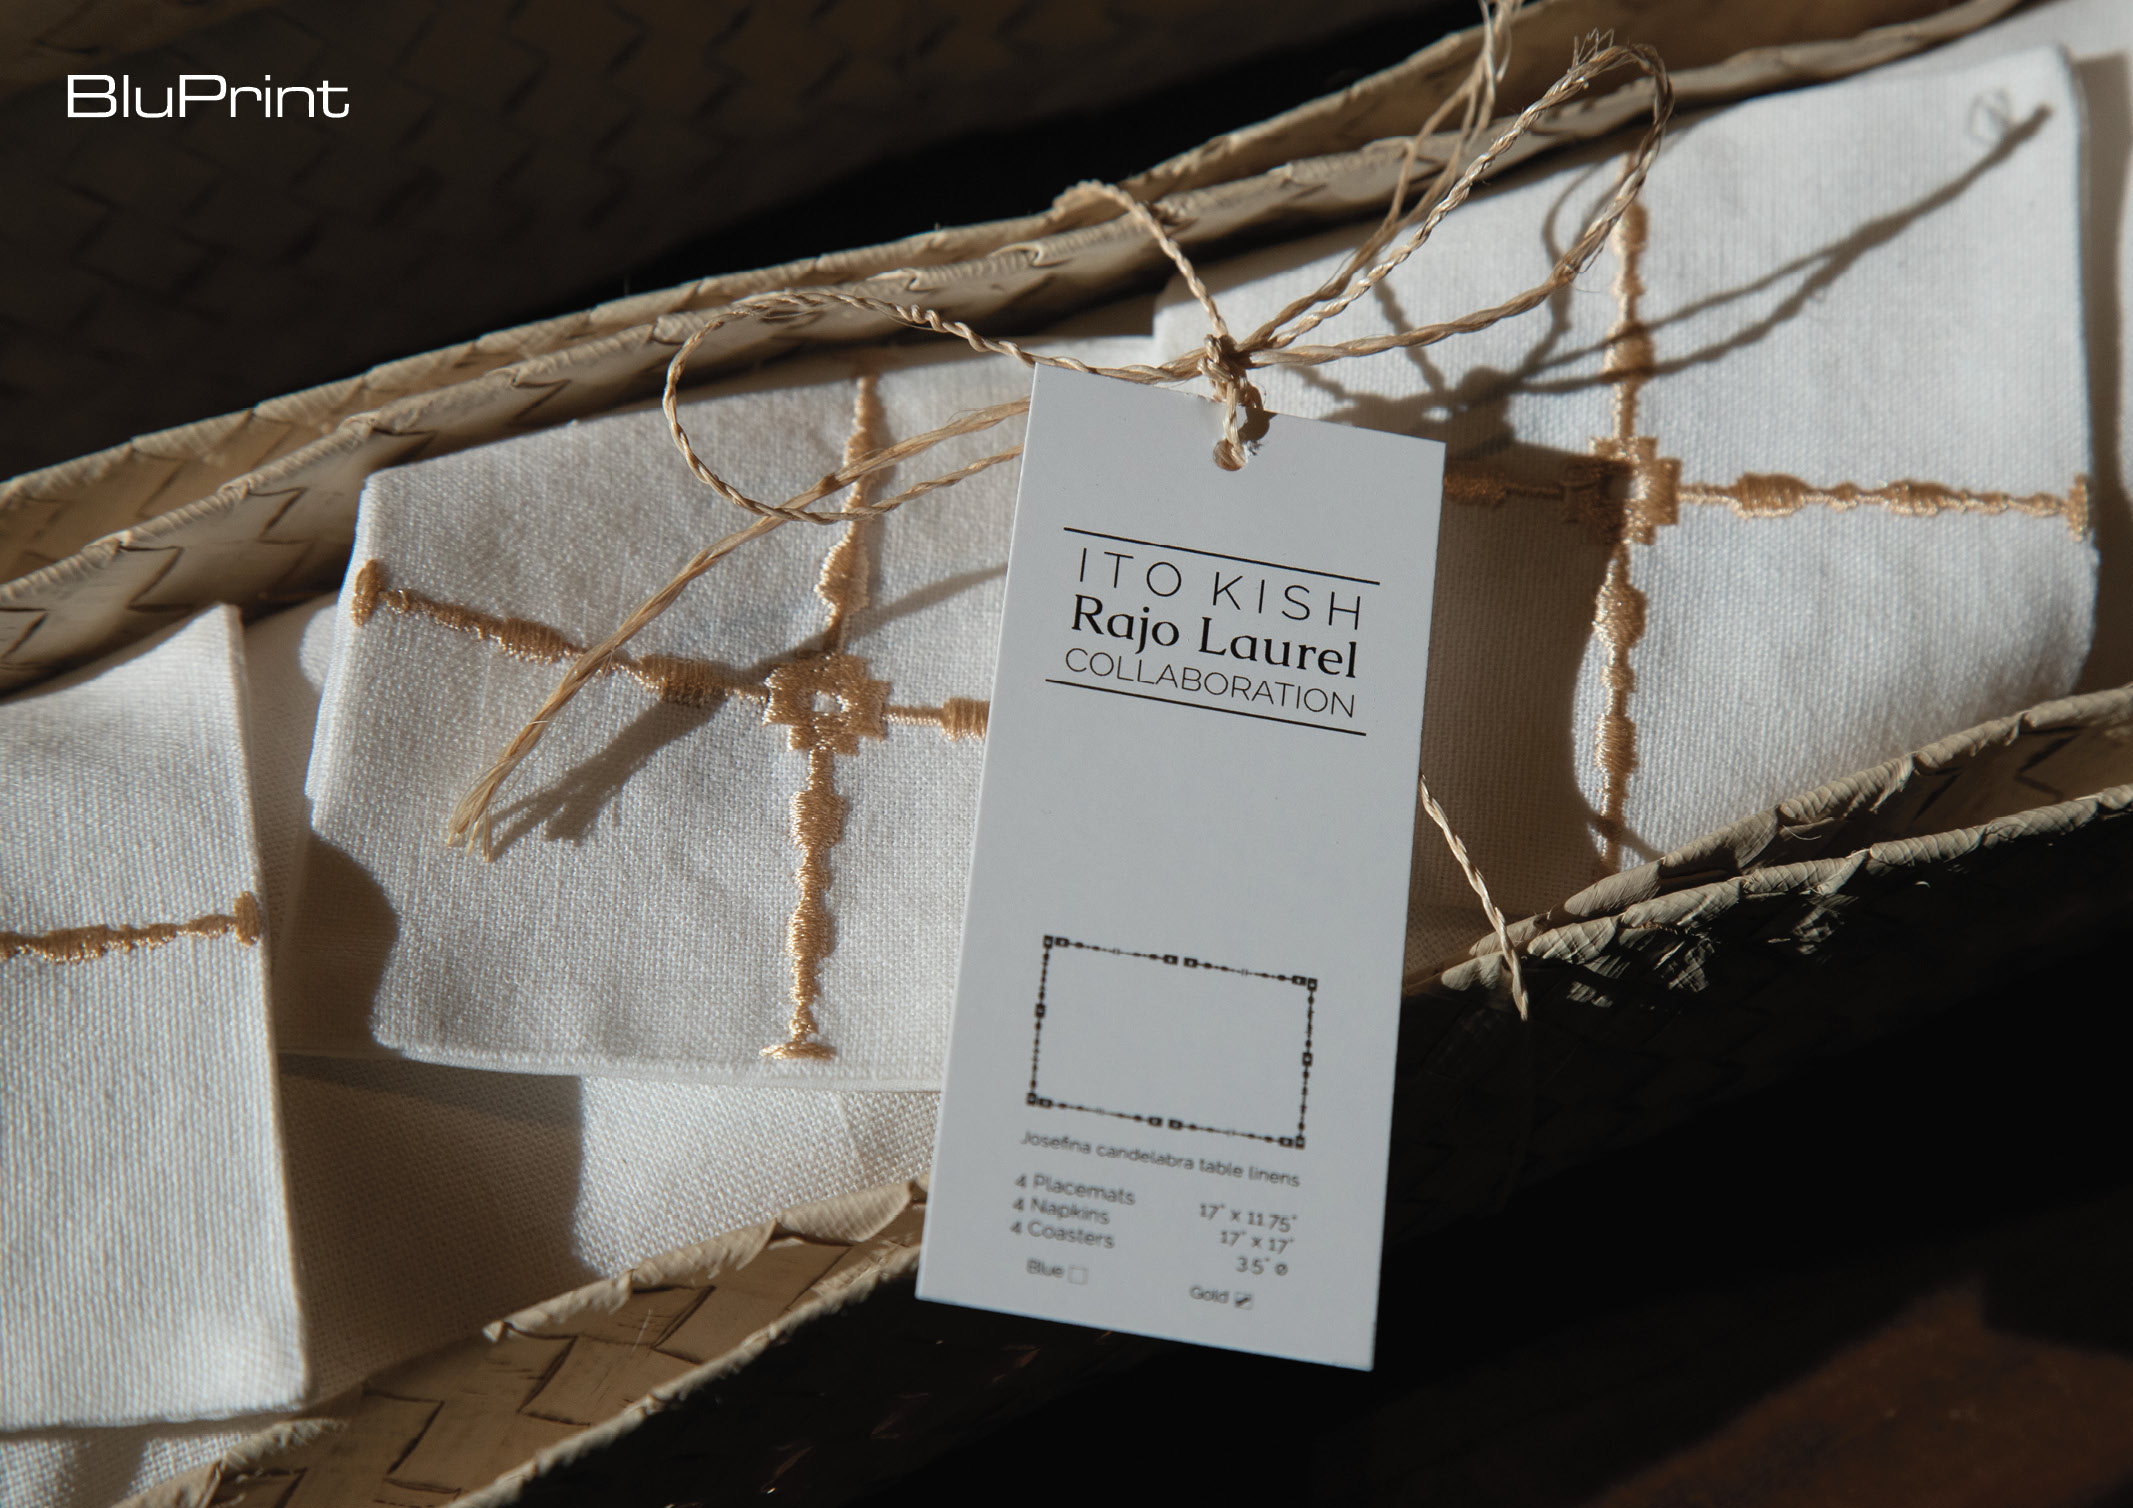 linen napkins with candelabra motif in woven packaging